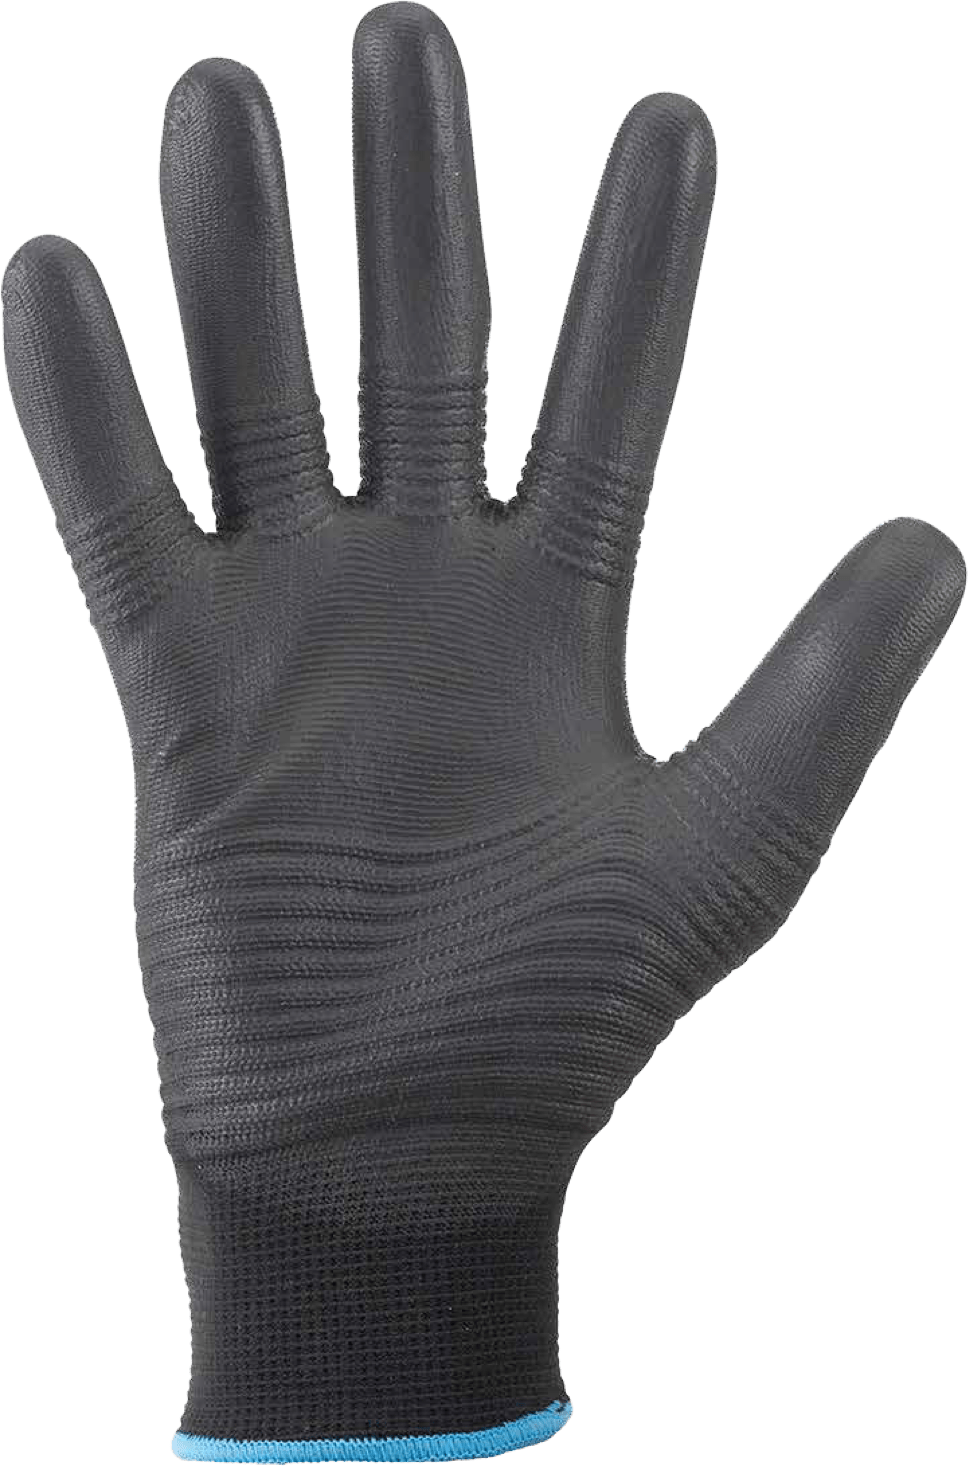 4 Pairs Gorilla Grip Trax All Terrain Gloves LARGE - 2 Packages Of